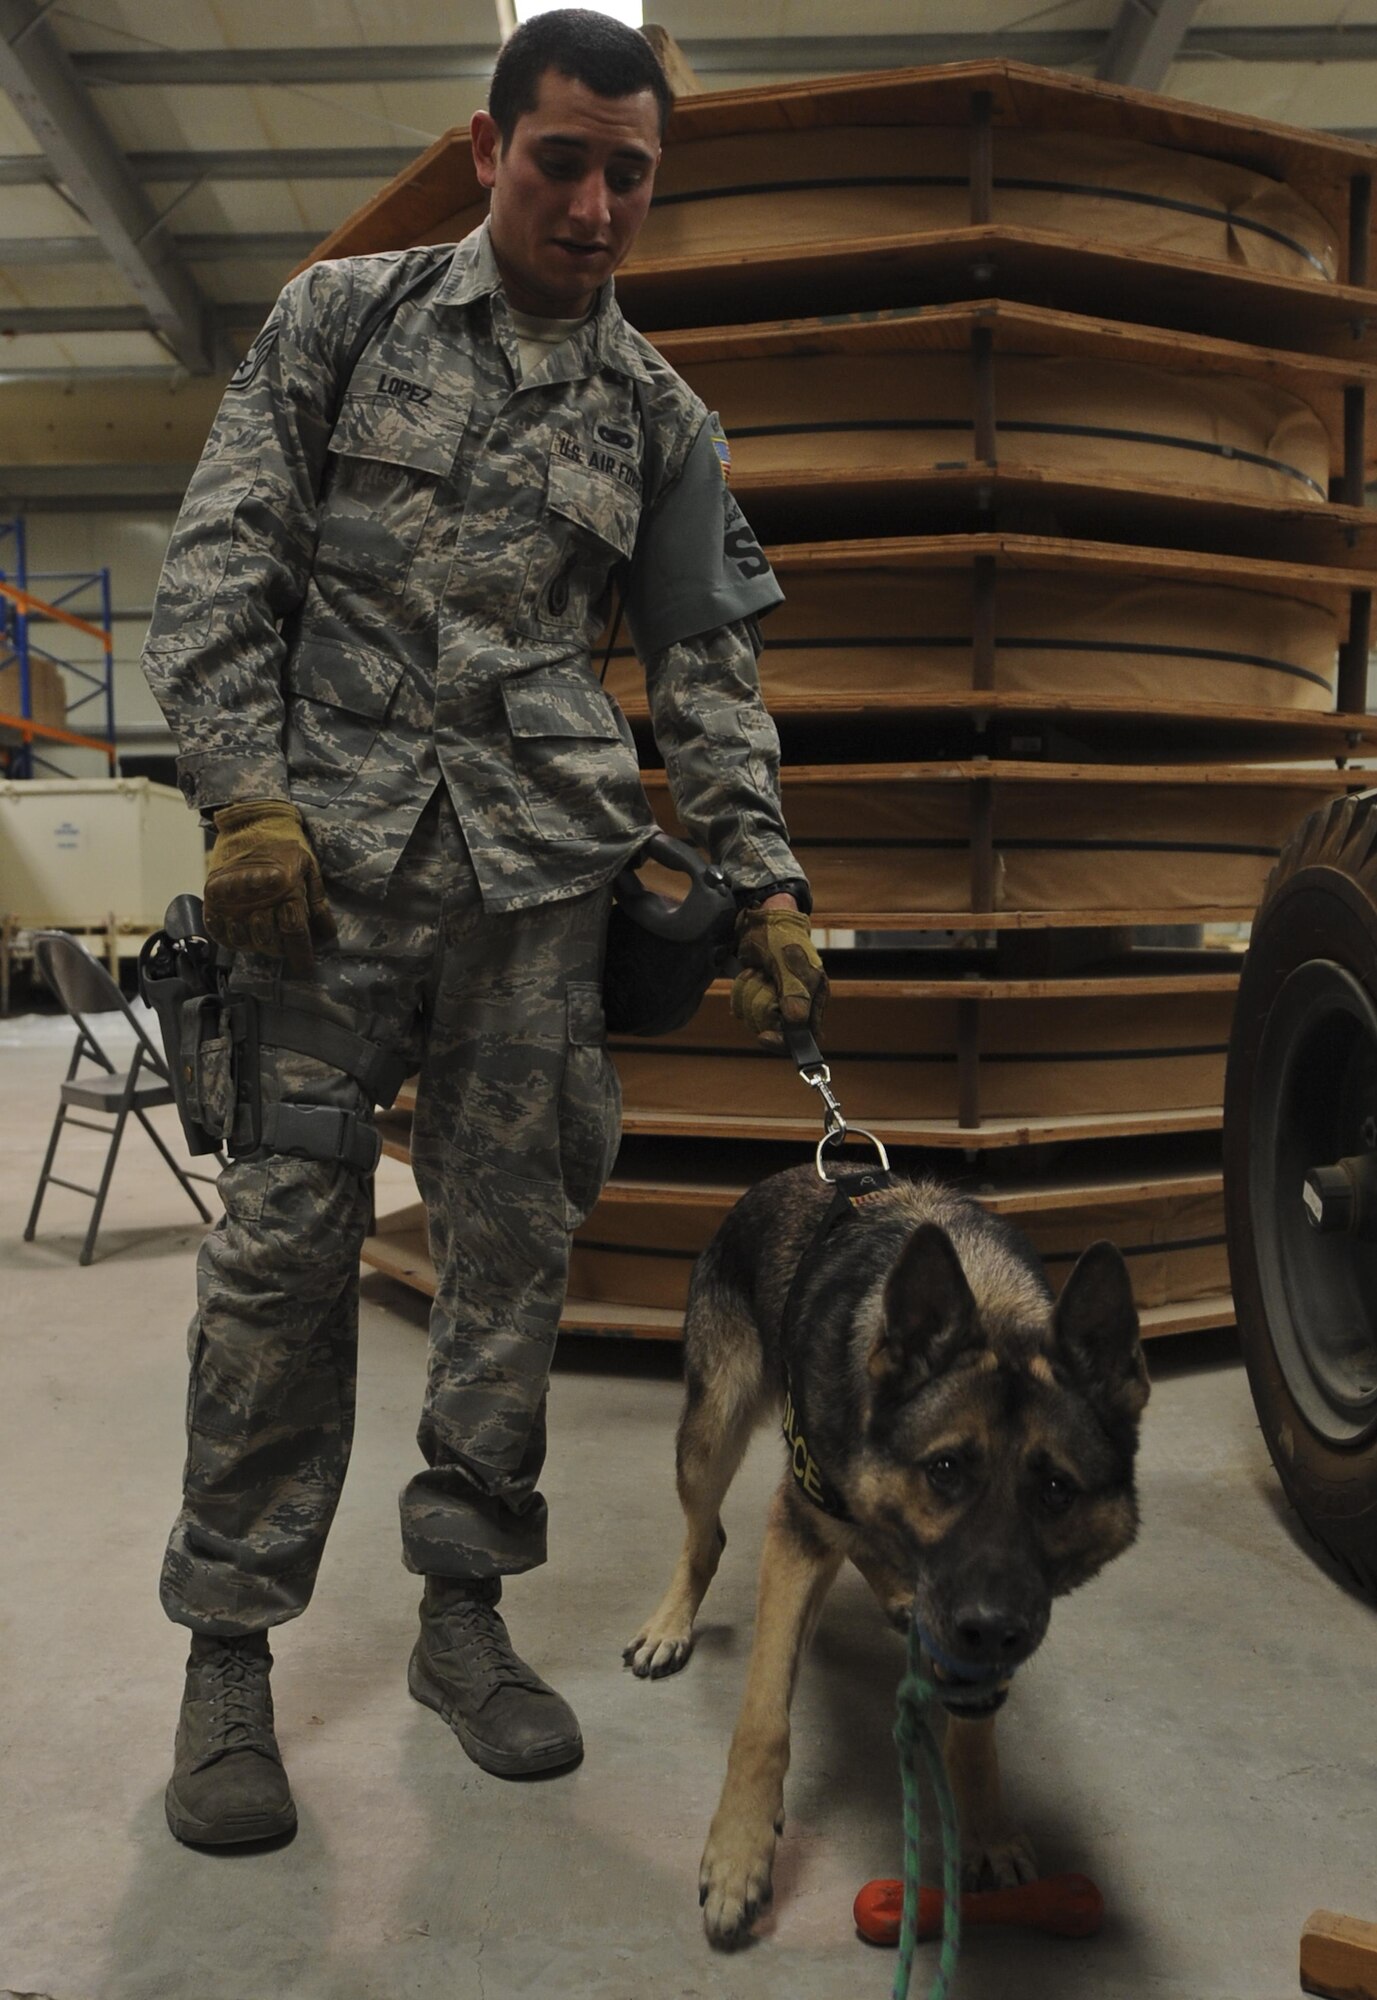 Mayo, 380th Expeditionary Security Forces Squadron military working dog, bites on his reward given to him by Staff Sgt. Justin Lopez, 380th ESFS MWD handler, after searching for explosives or narcotics during training in a warehouse at an undisclosed location in Southwest Asia Aug. 8, 2013. The training was designed to test the MWD’s senses for detecting explosives or narcotics in different quantities. Lopez and Mayo are deployed from Luke Air Force Base, Ariz.